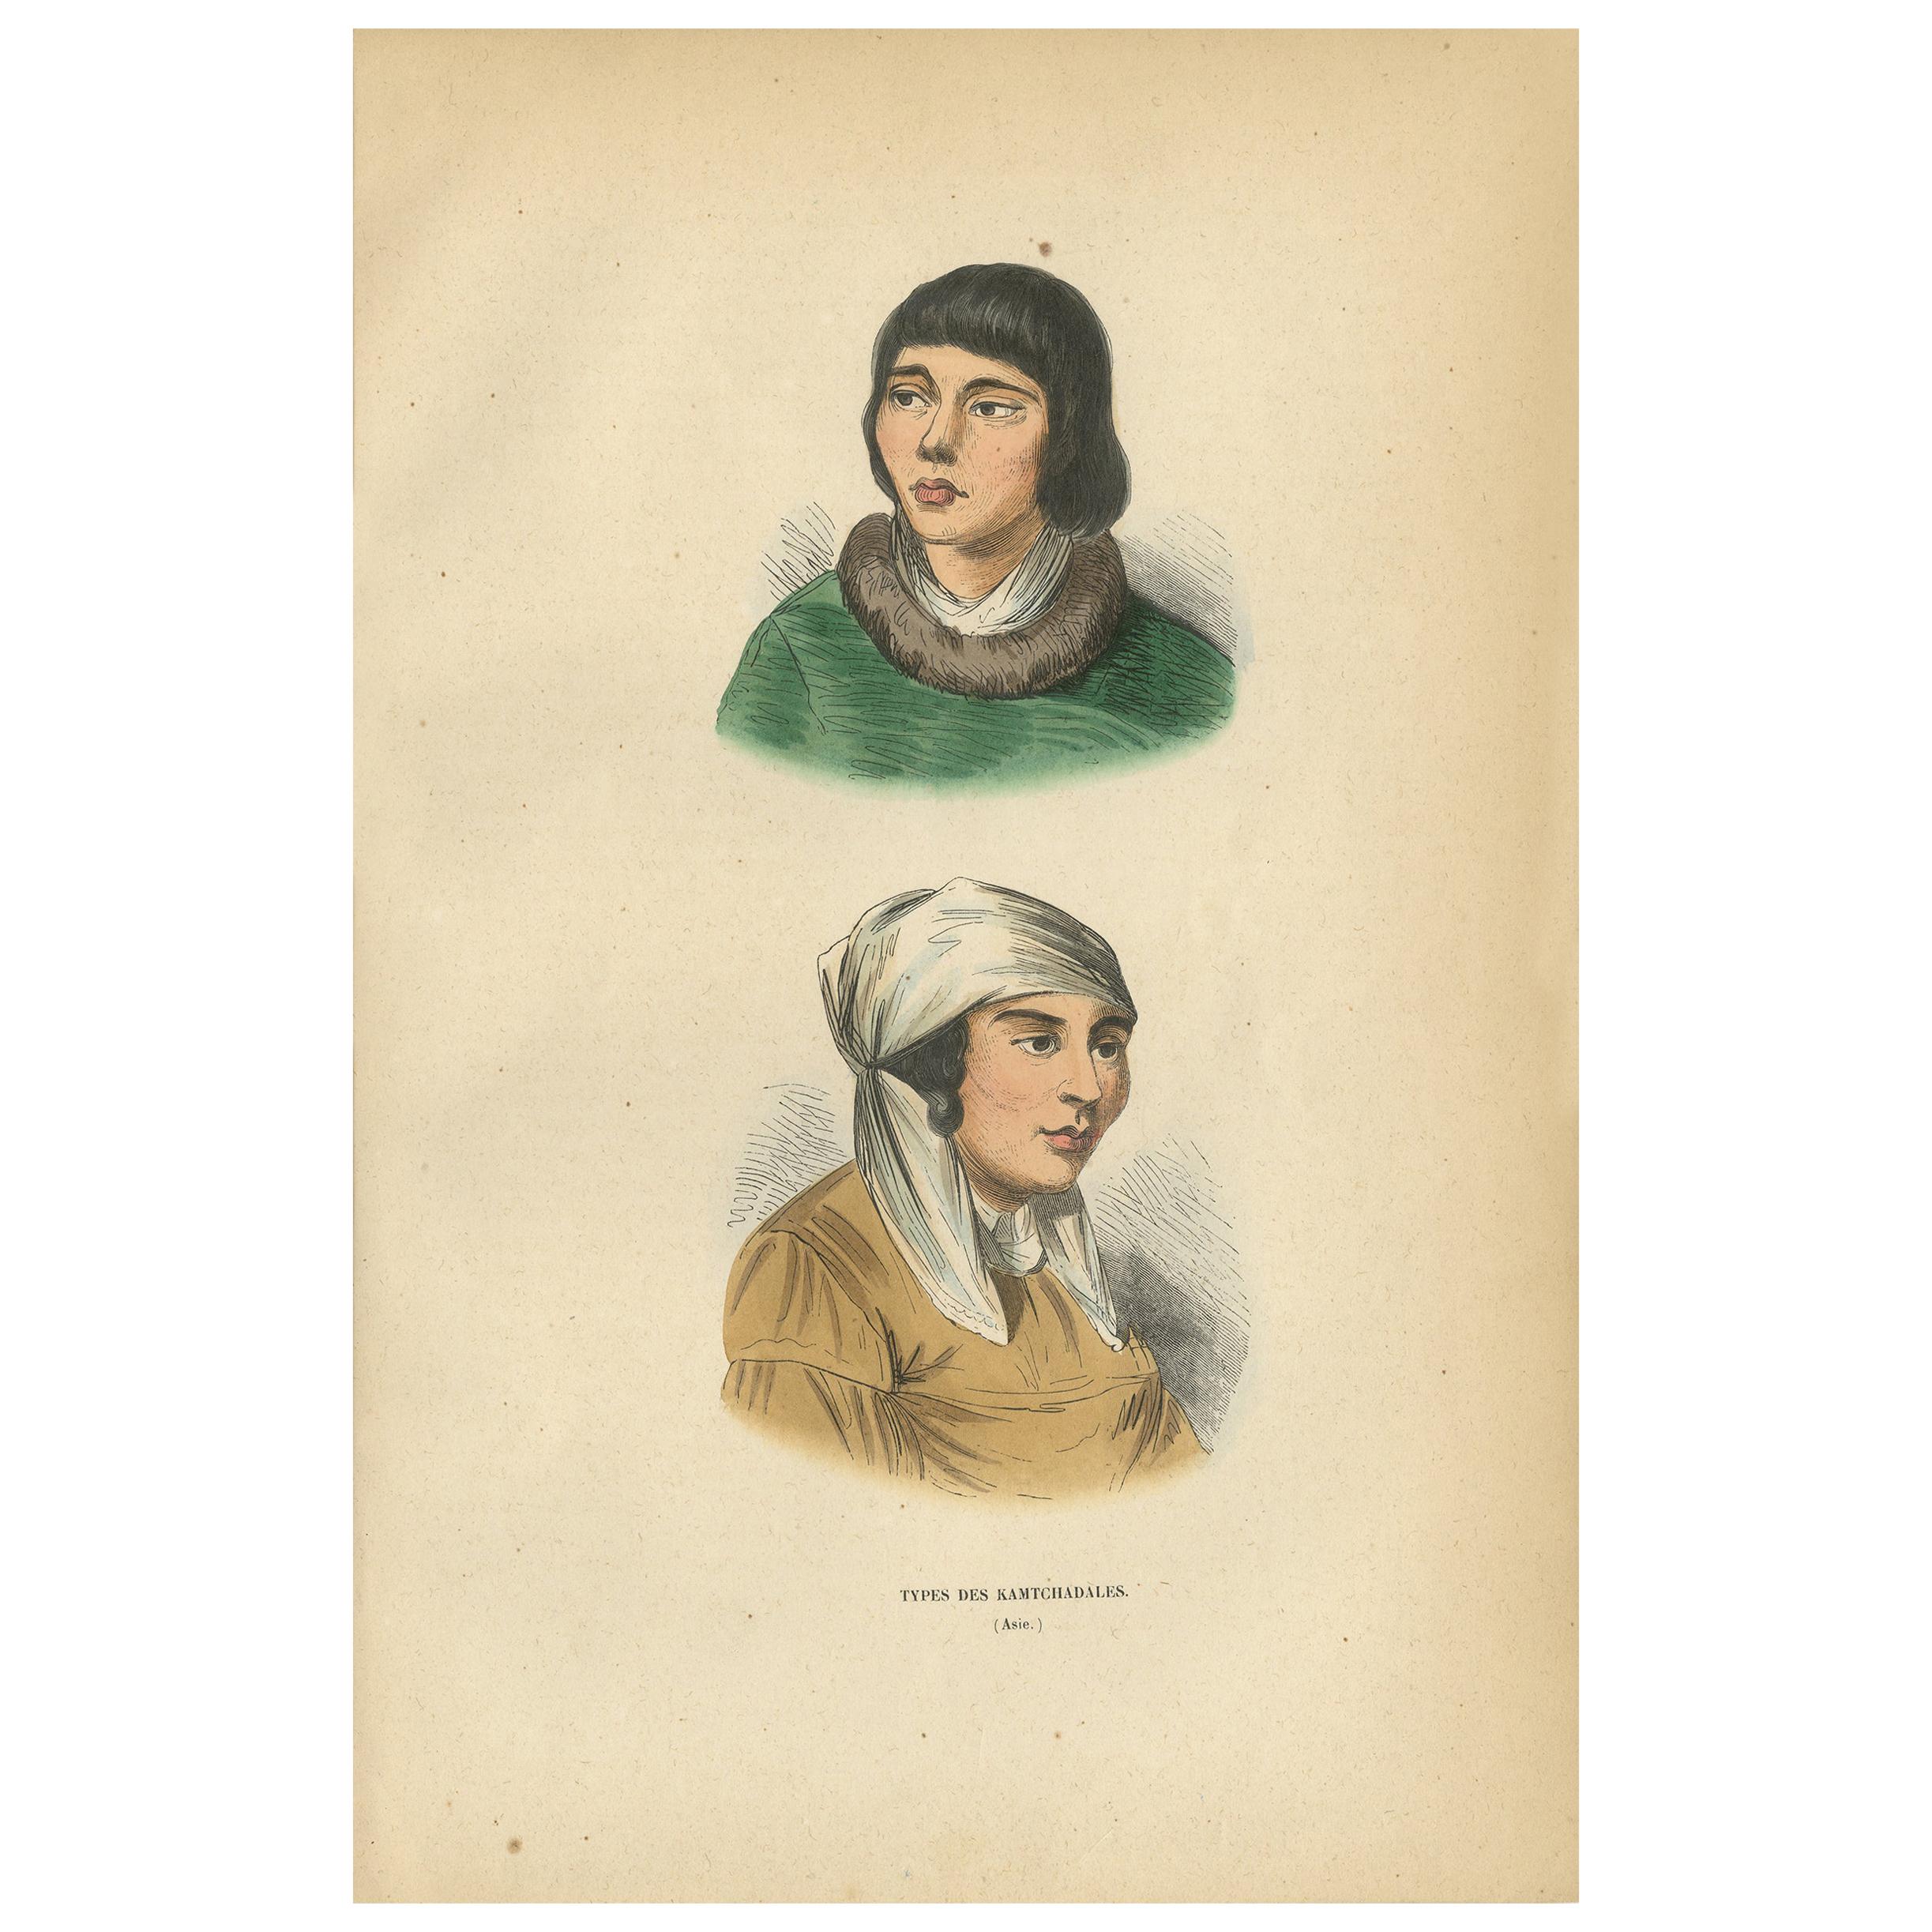 Antique Print of Kamchadals, inhabitants of Kamchatka, Russia, '1843' For Sale